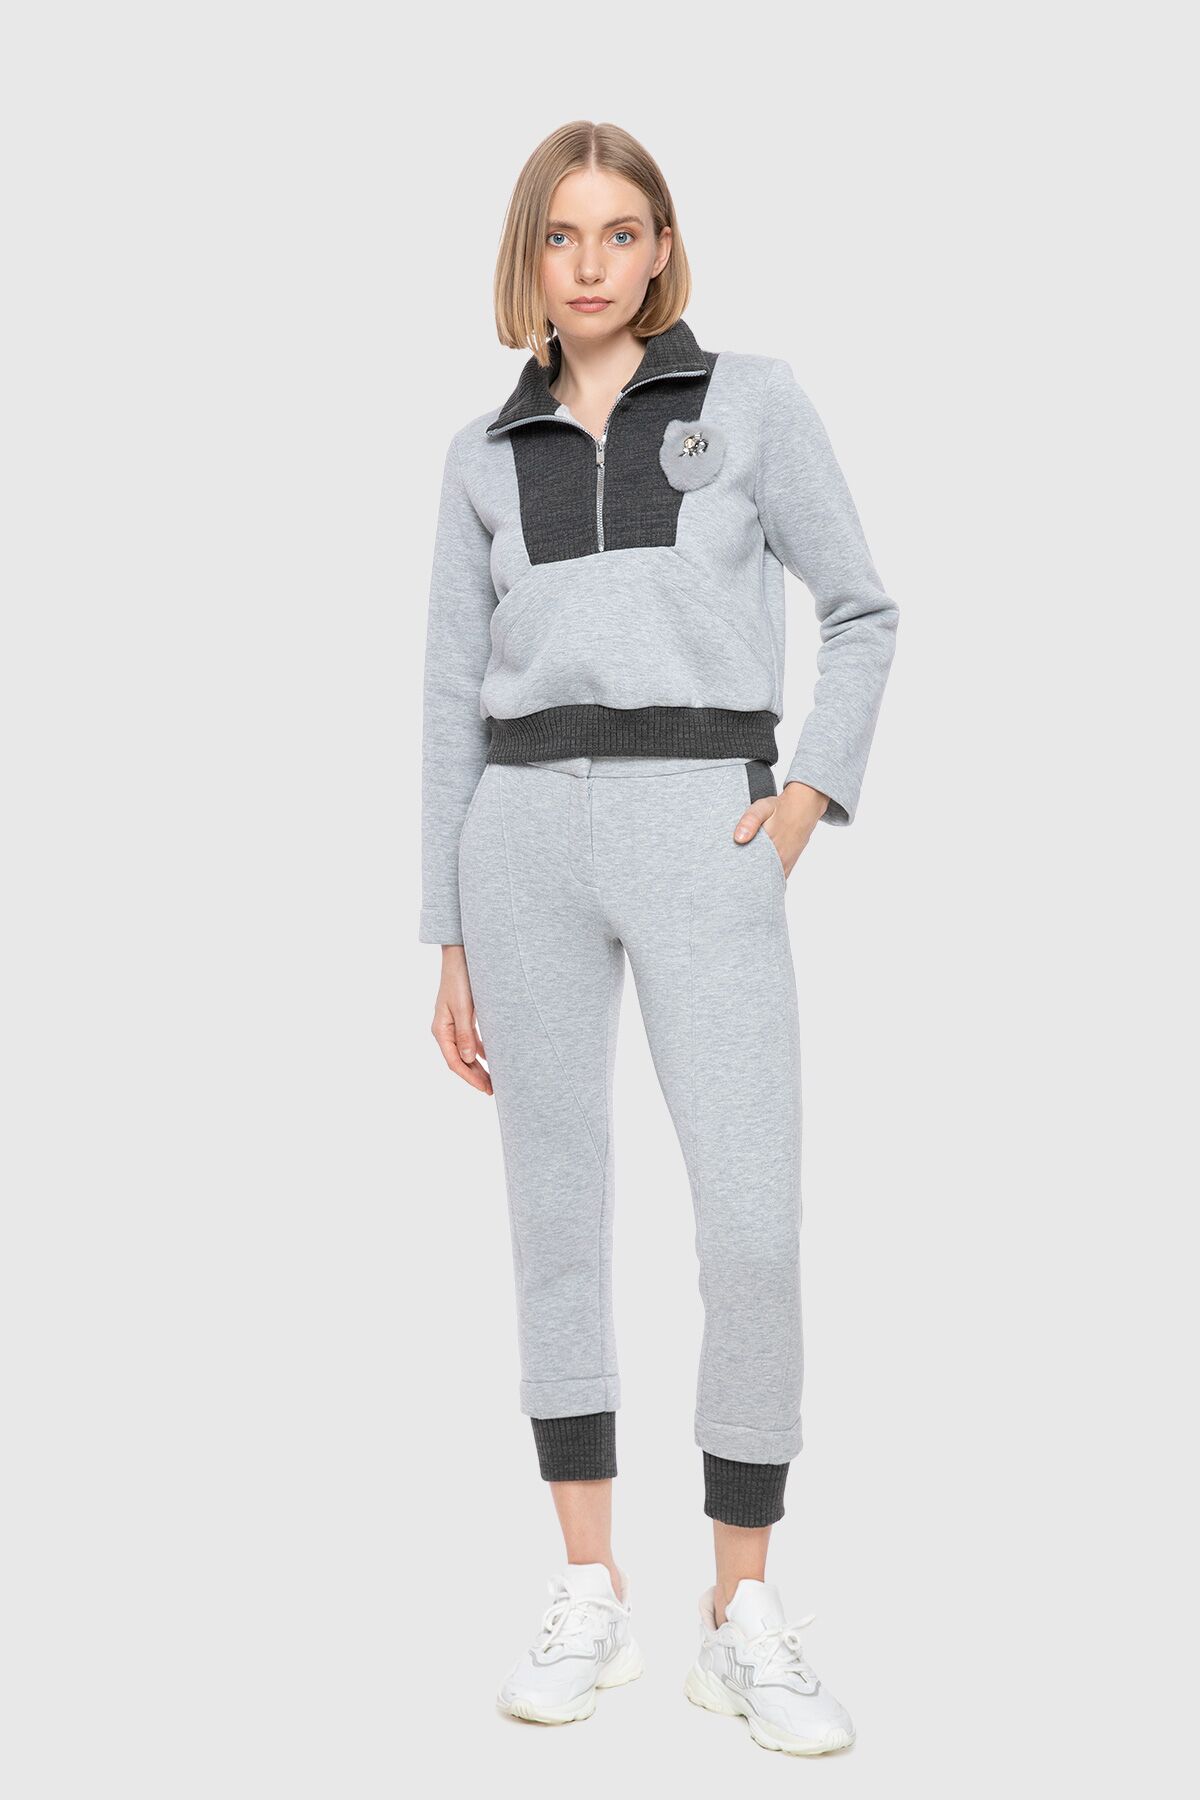 GIZIA SPORT - Zippered Stand Gray Top